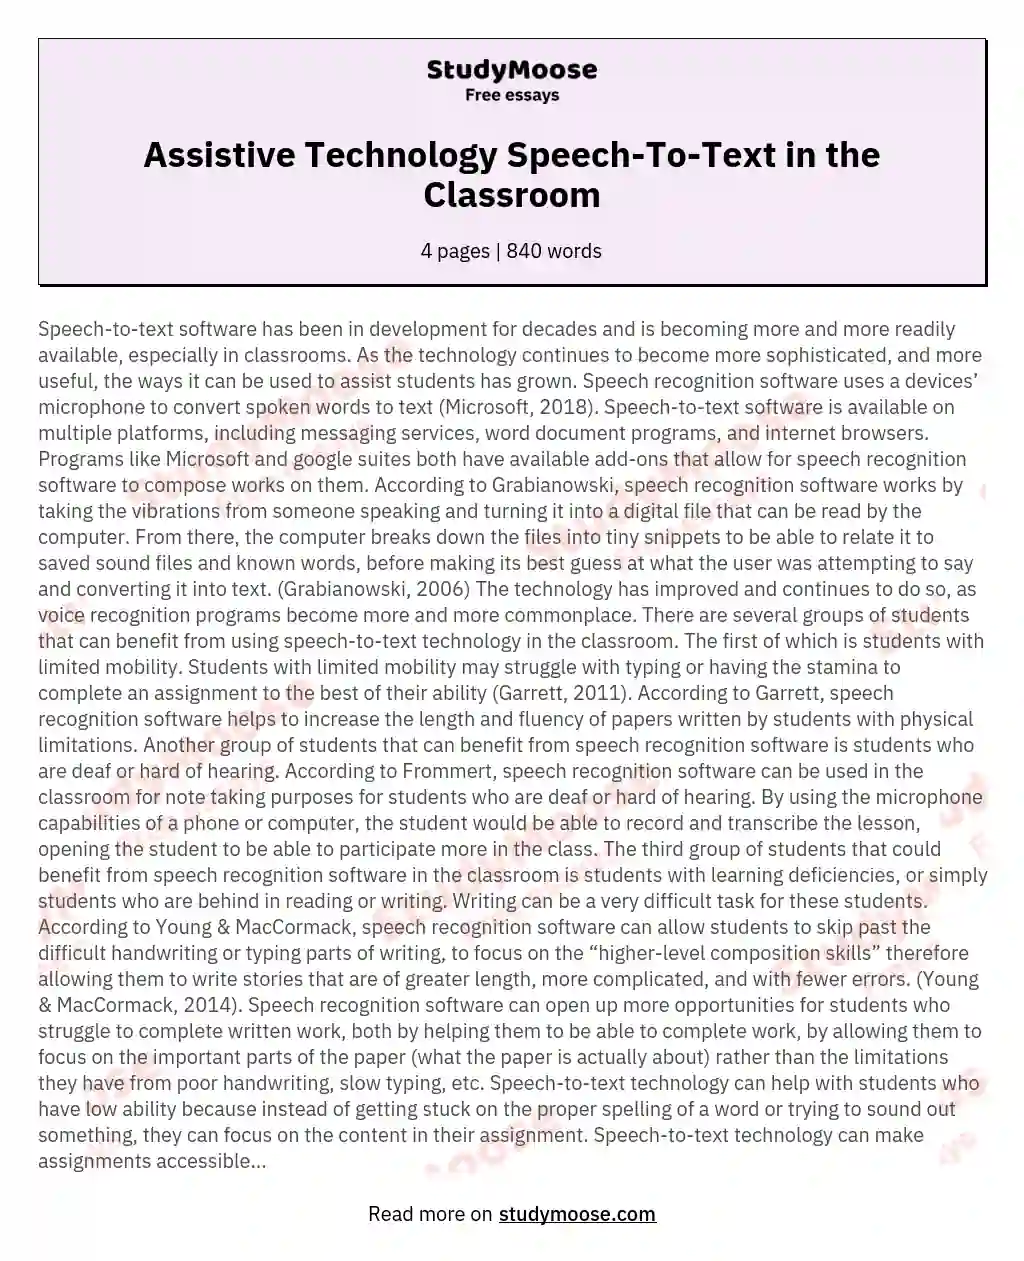 Assistive Technology Speech-To-Text in the Classroom essay